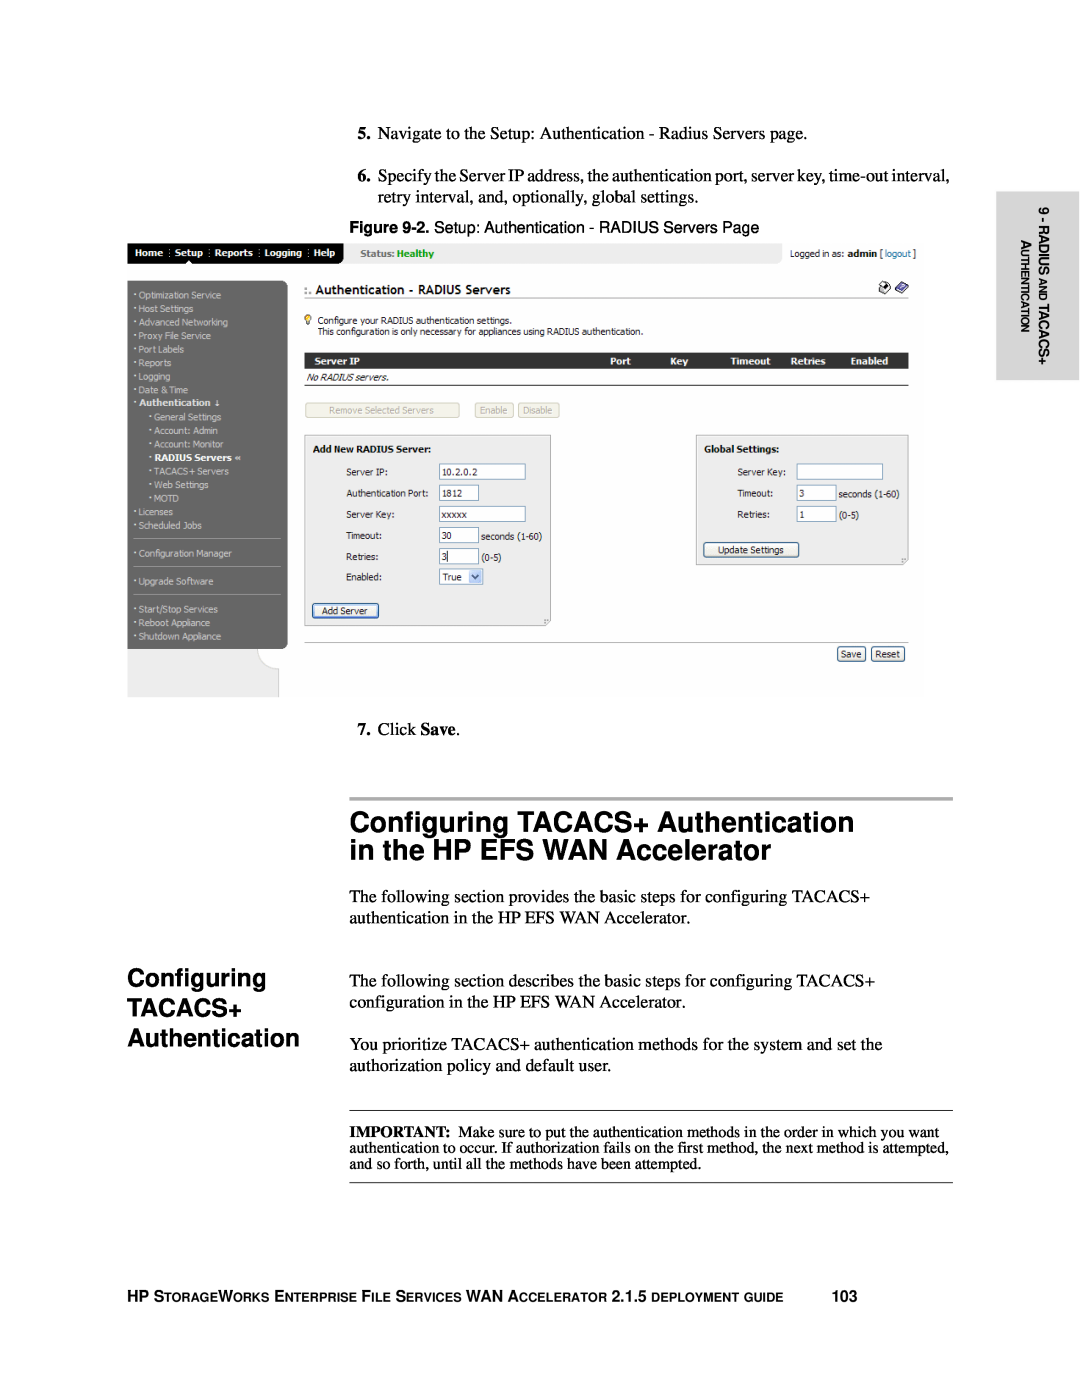 HP Enterprise File Services WAN Accelerator manual Configuring TACACS+ Authentication in the HP EFS WAN Accelerator 